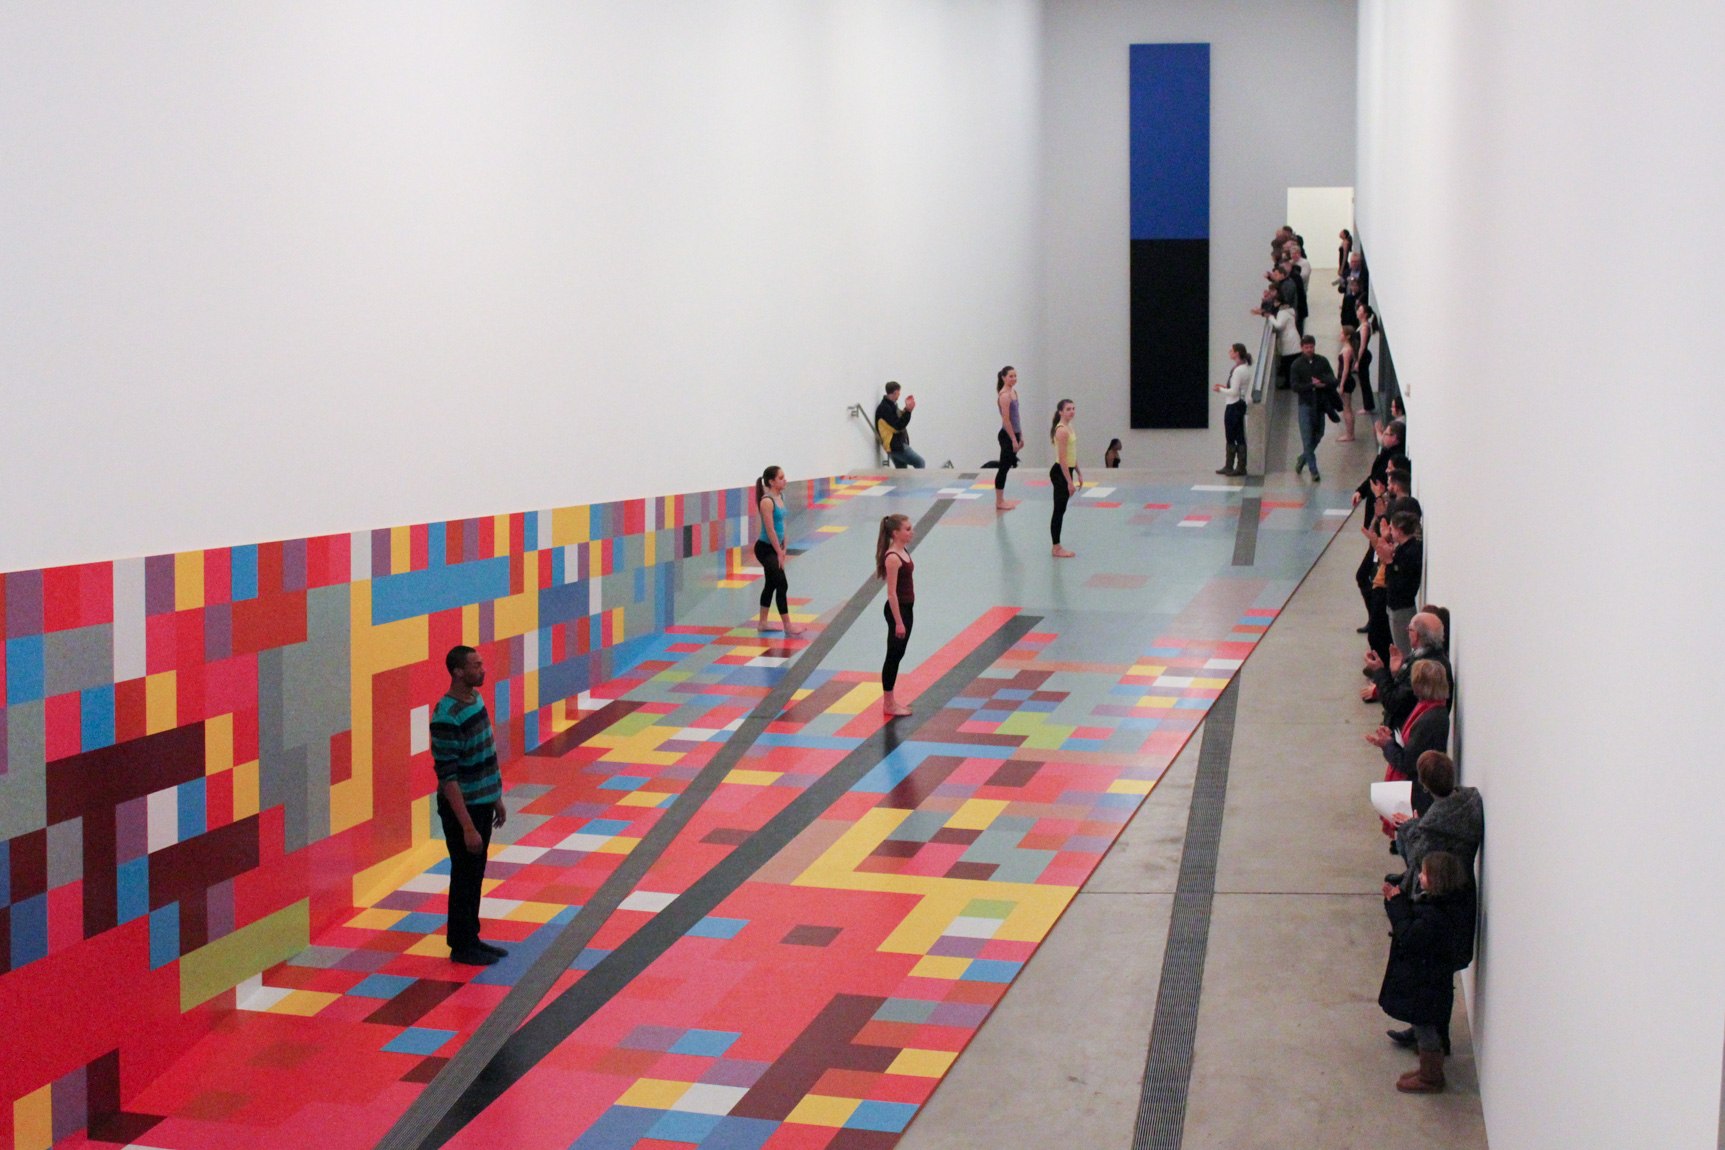 COCA dancers perform with David Scanavino's "Candy Crush" installation. The dancers space out and stand straight up, and an audience applauds them from the opposing wall.